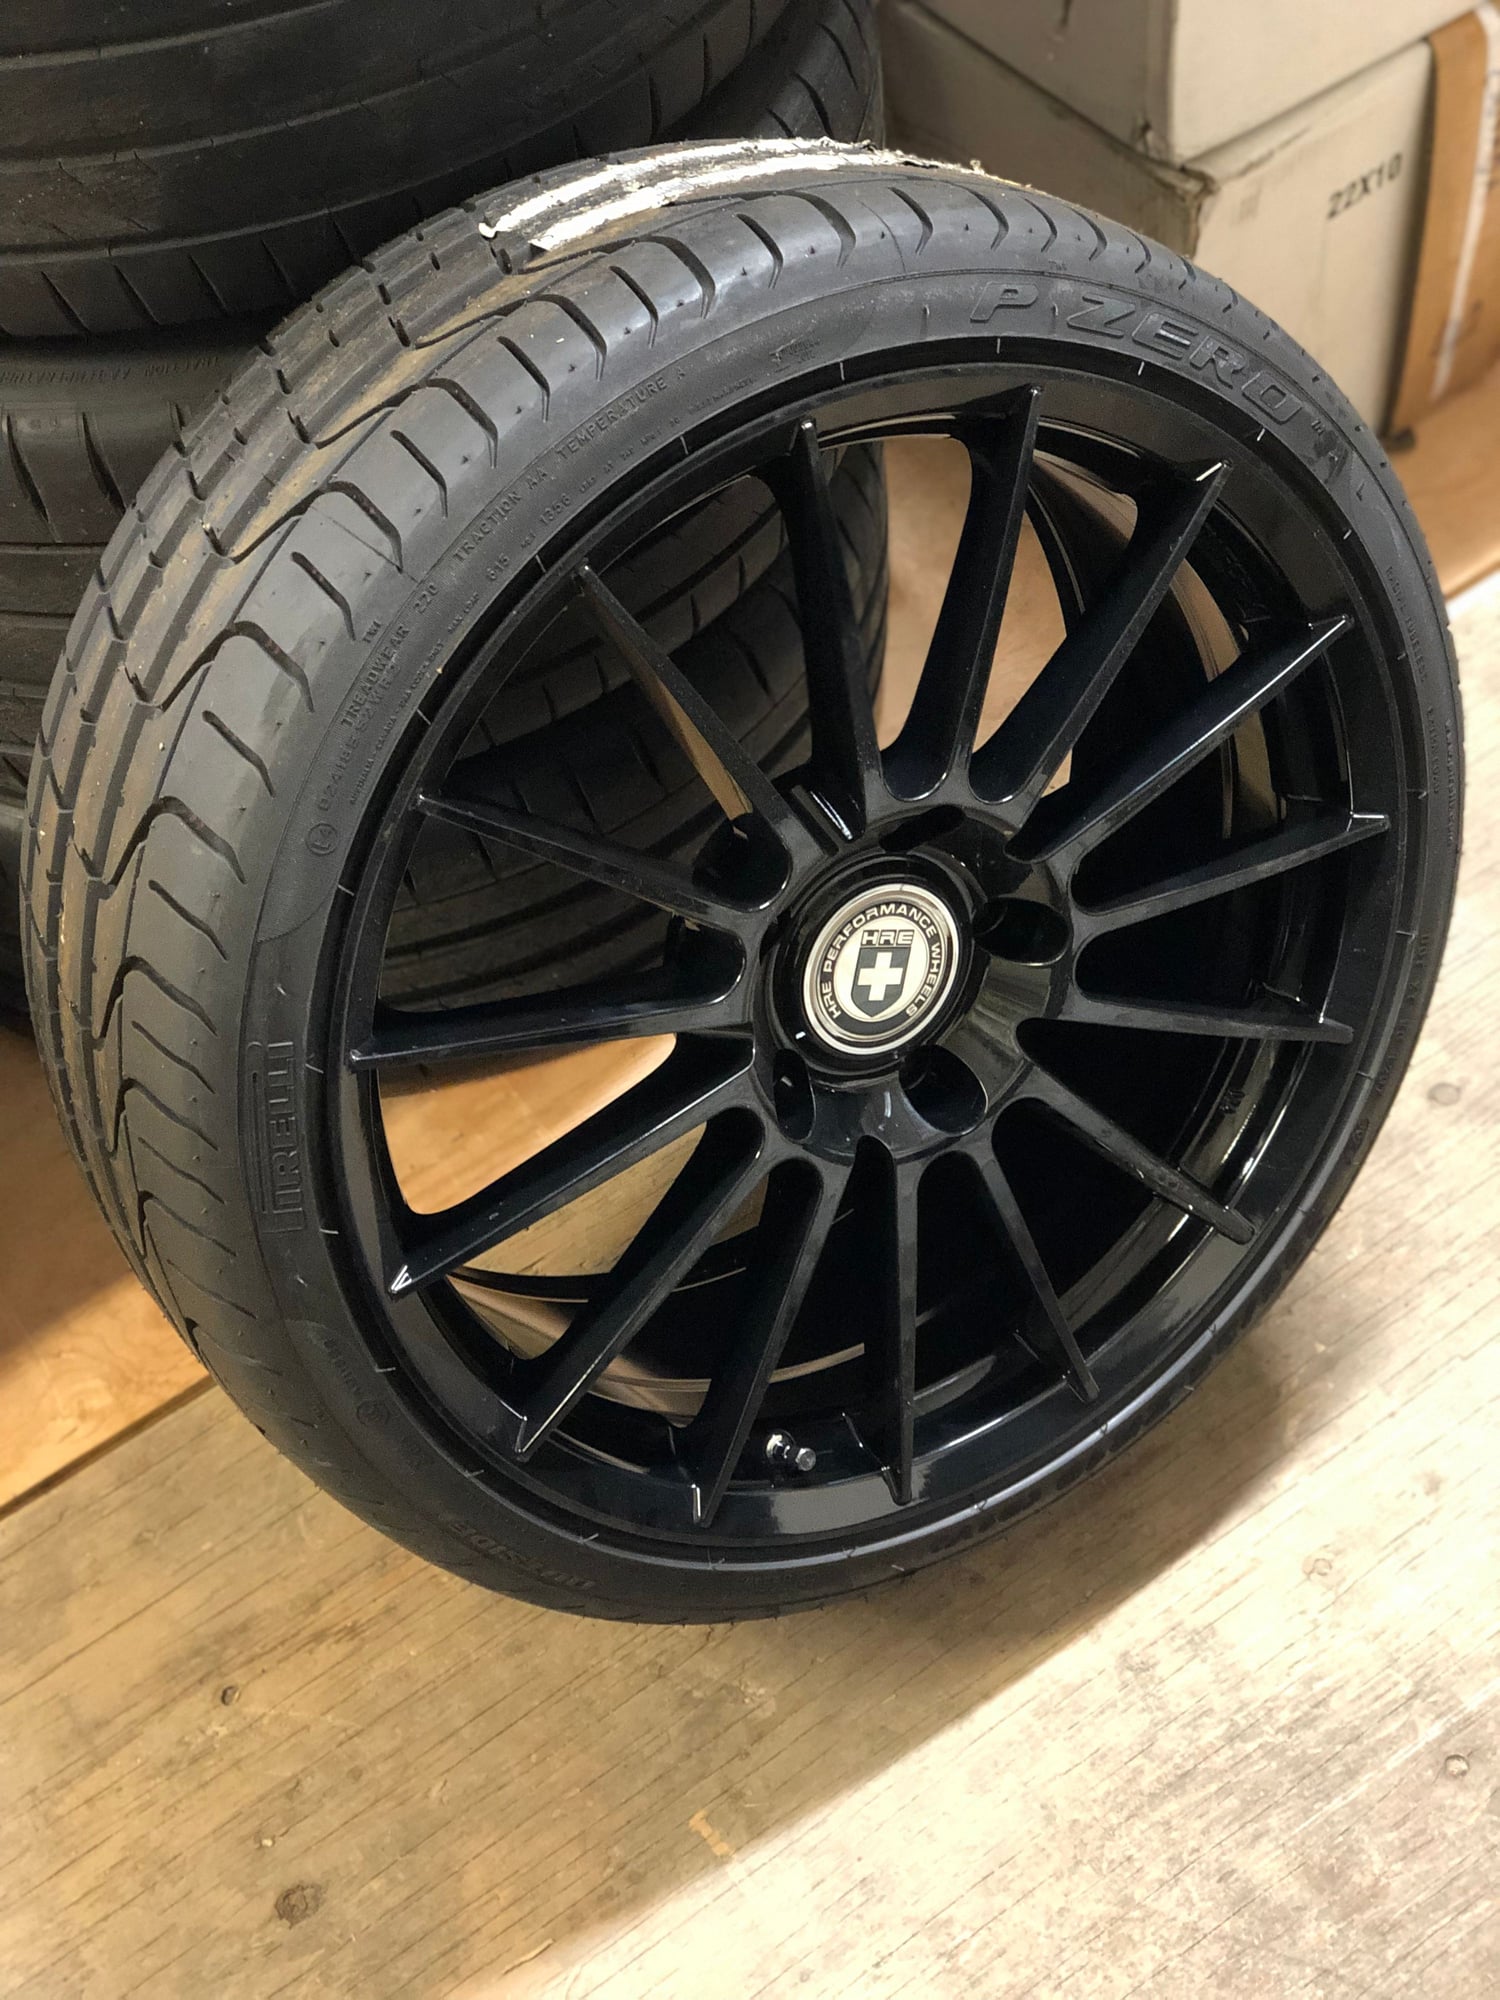 Wheels and Tires/Axles - Widebody 993 19" HRE Wheels & Tires - BRAND NEW - New - 1994 to 1998 Porsche 911 - 1999 to 2005 Porsche 911 - Winnipeg, MB R3R2Y6, Canada